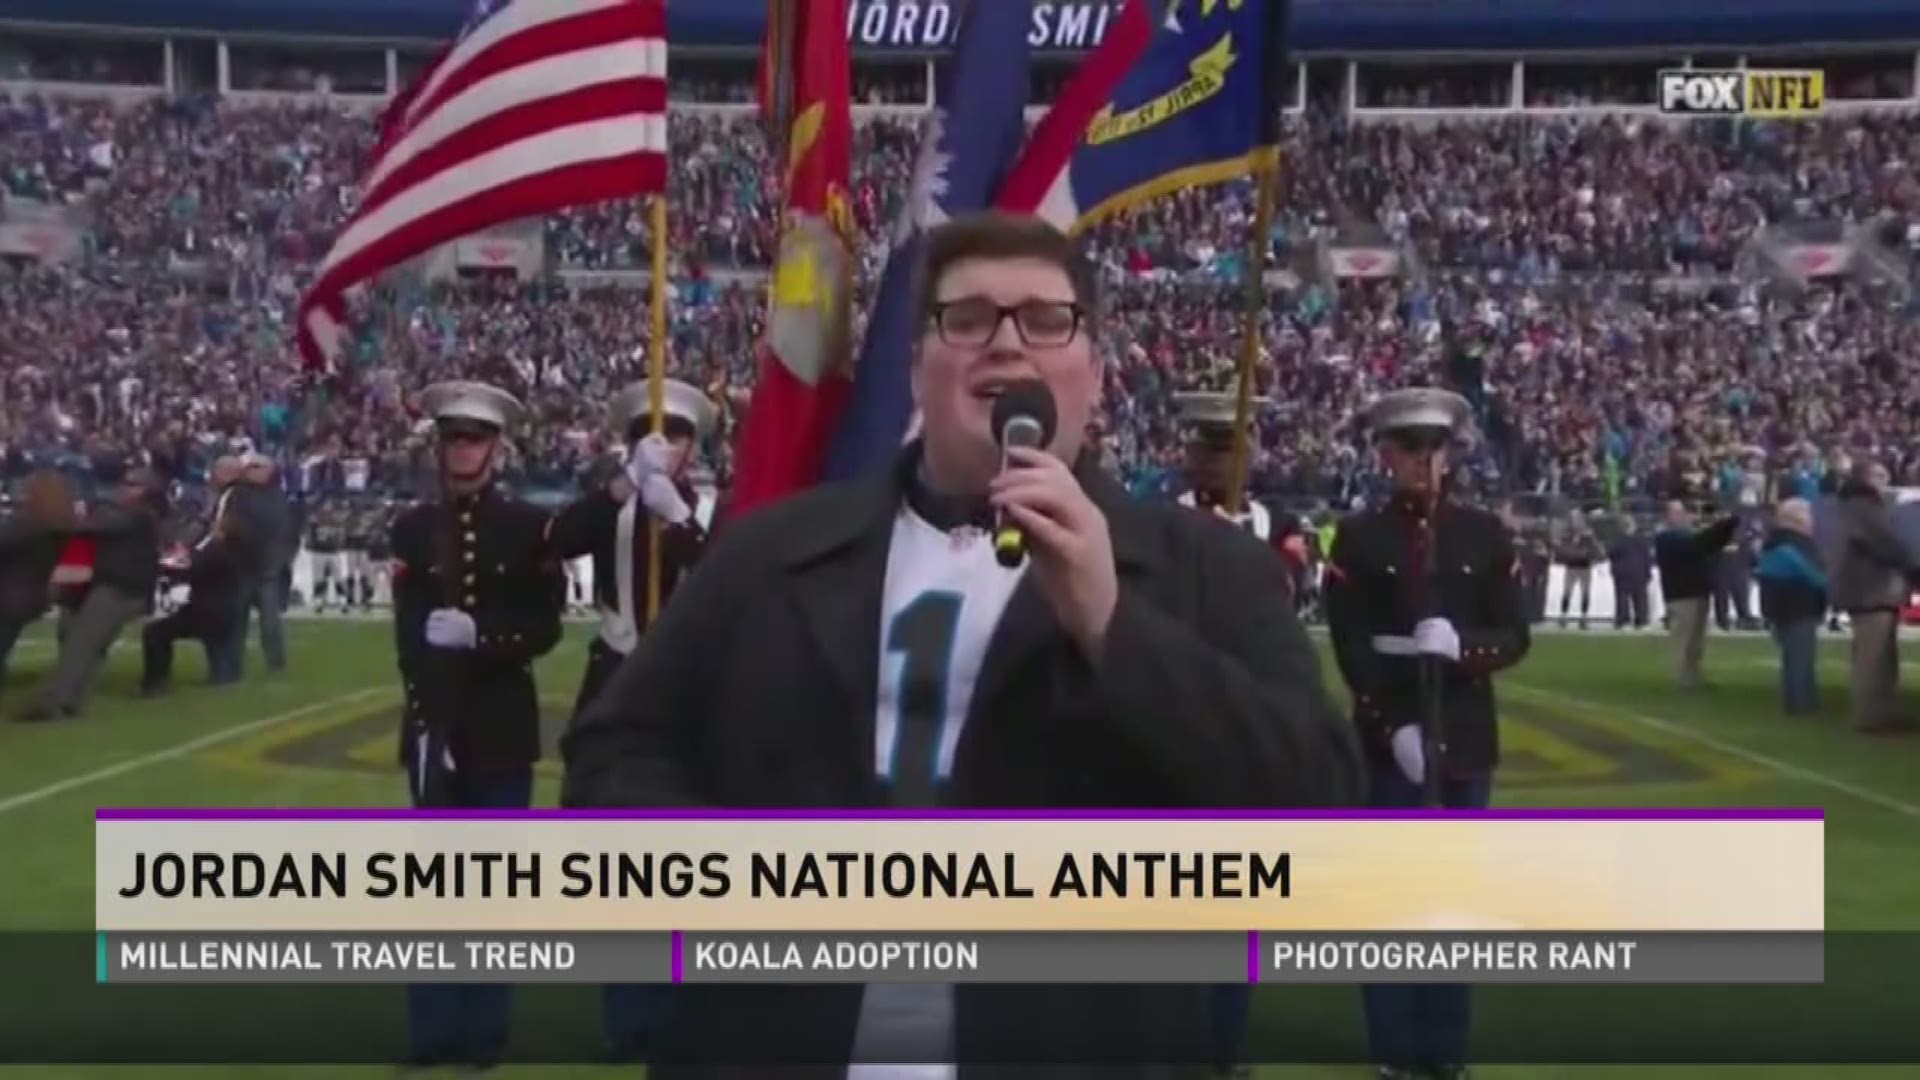 Jordan Smith sang the national anthem at the NFC playoff game between the Carolina Panthers and Seattle Seahawks on Jan. 17, 2016.